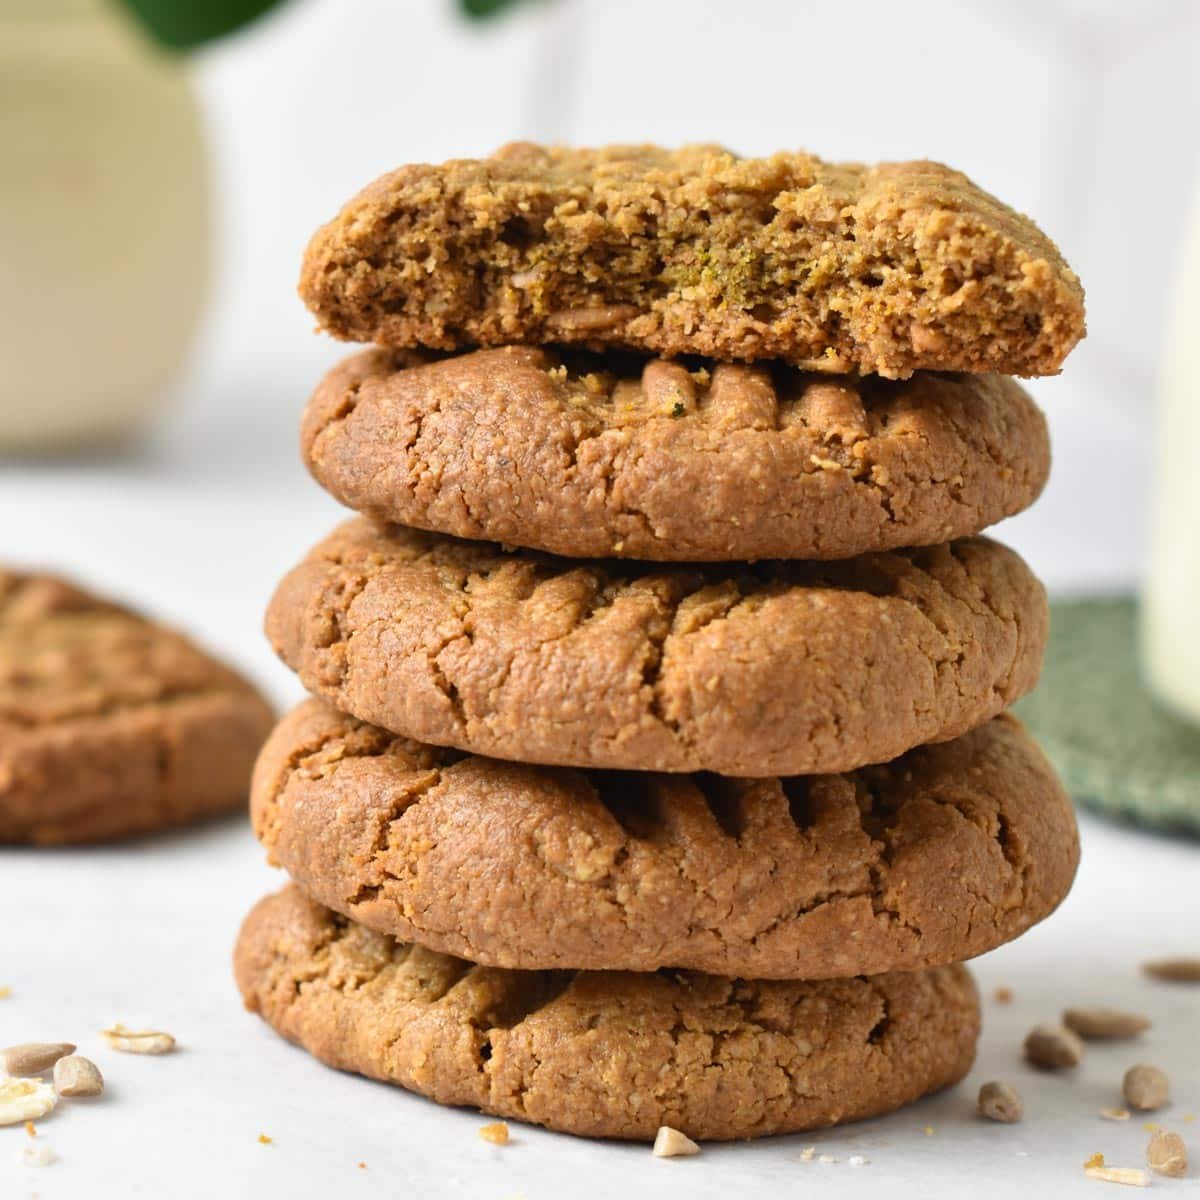 a stack of sunflower seed butter cookies with the one on top half broken showing the golden brown color